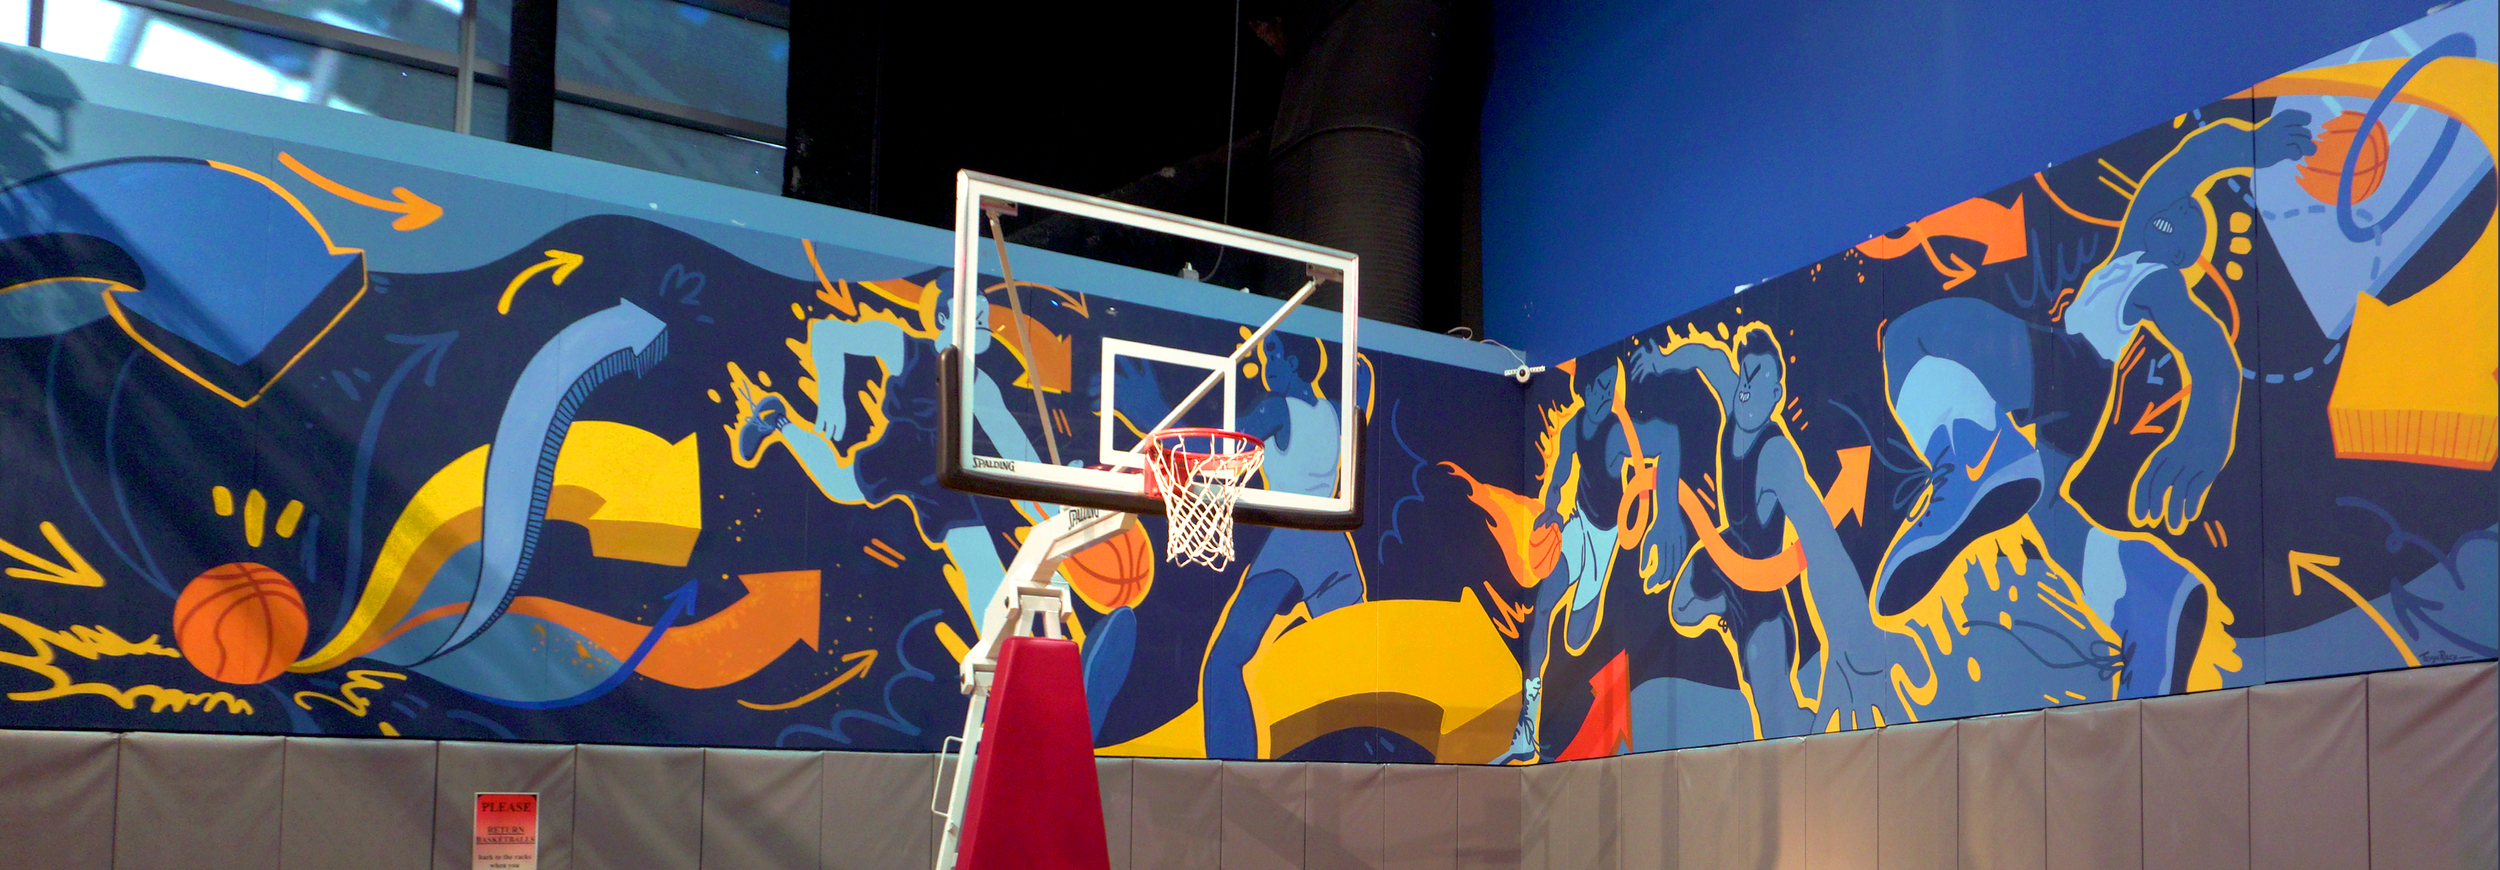 College Basketball Experience Mural TRW.png